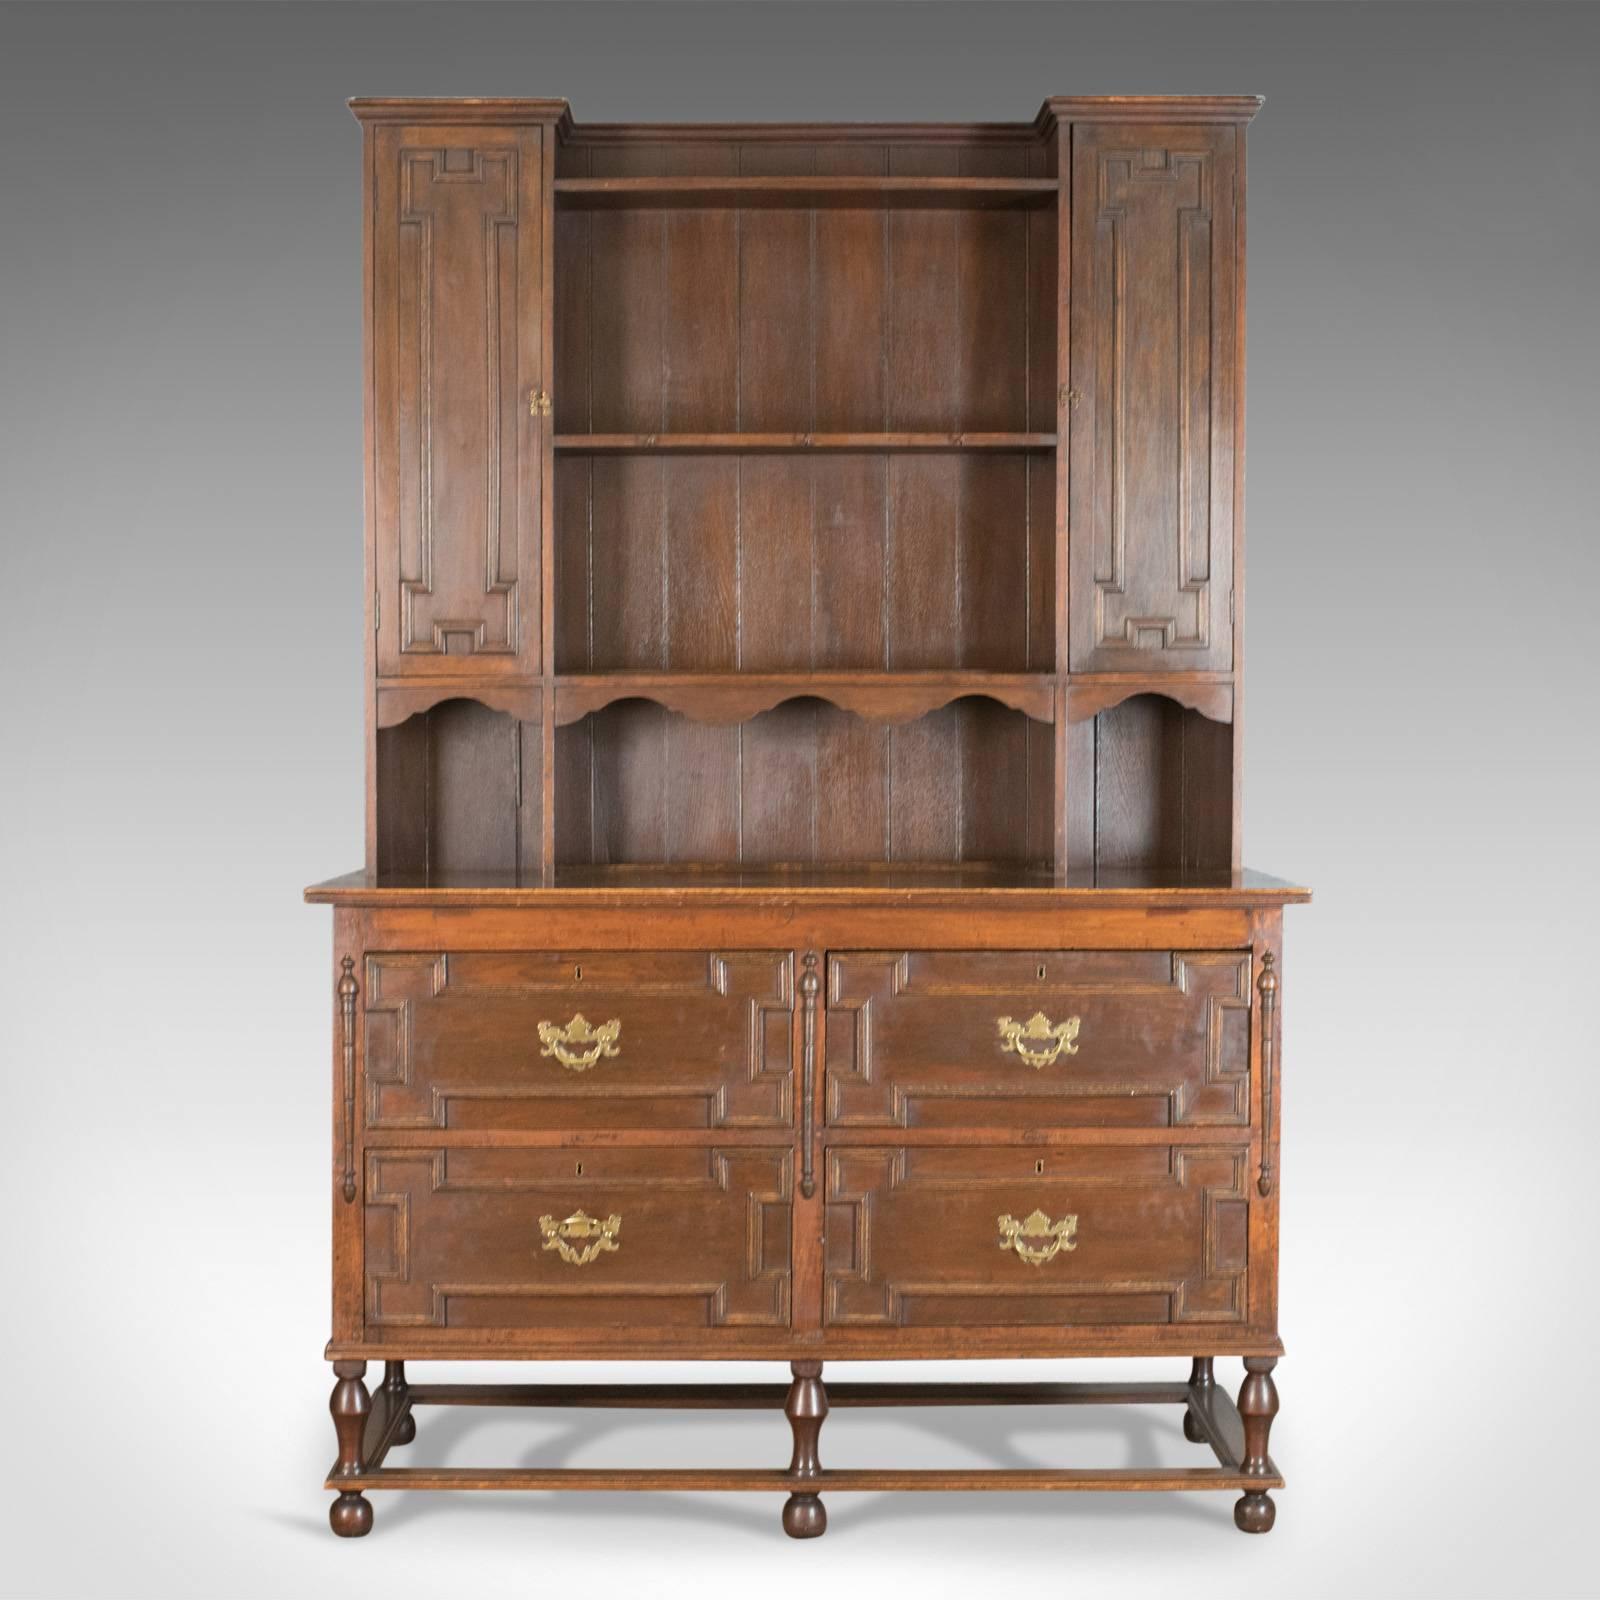 This is an antique dresser, a Victorian country kitchen sideboard in the Jacobean taste. In oak by Snawdon Bros of Exeter and Plymouth and dating to circa 1880.

A Victorian dresser in the Jacobean taste
Good color and grain interest with a